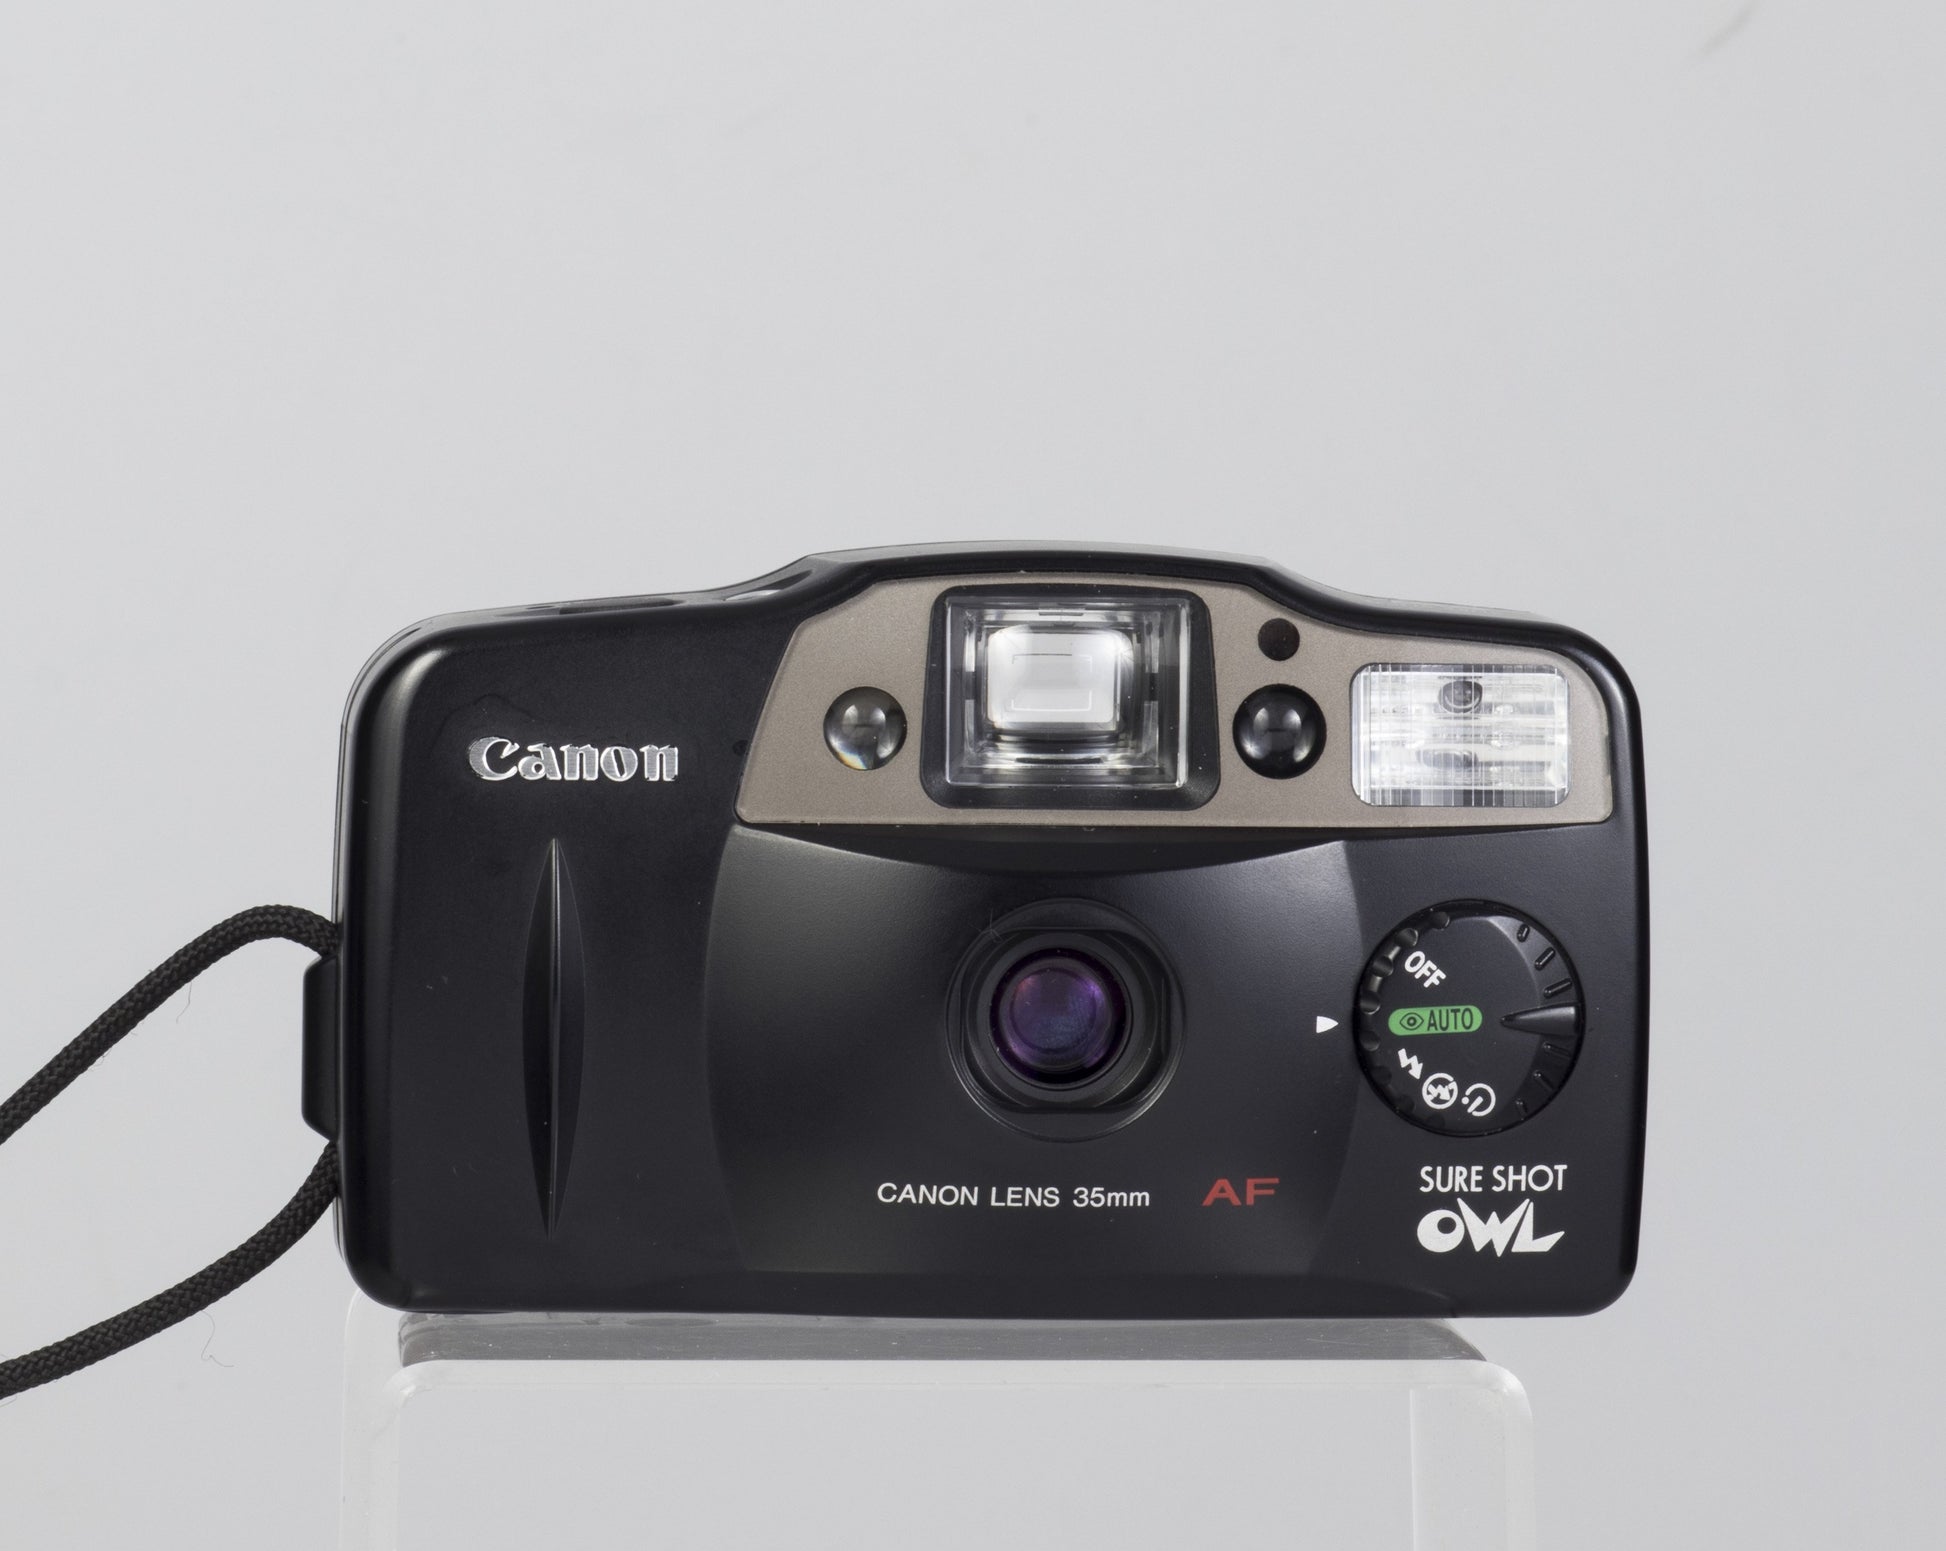 The Canon Sure Shot Owl (1997 version, also called the Prima AF-8) compact 35mm film camera